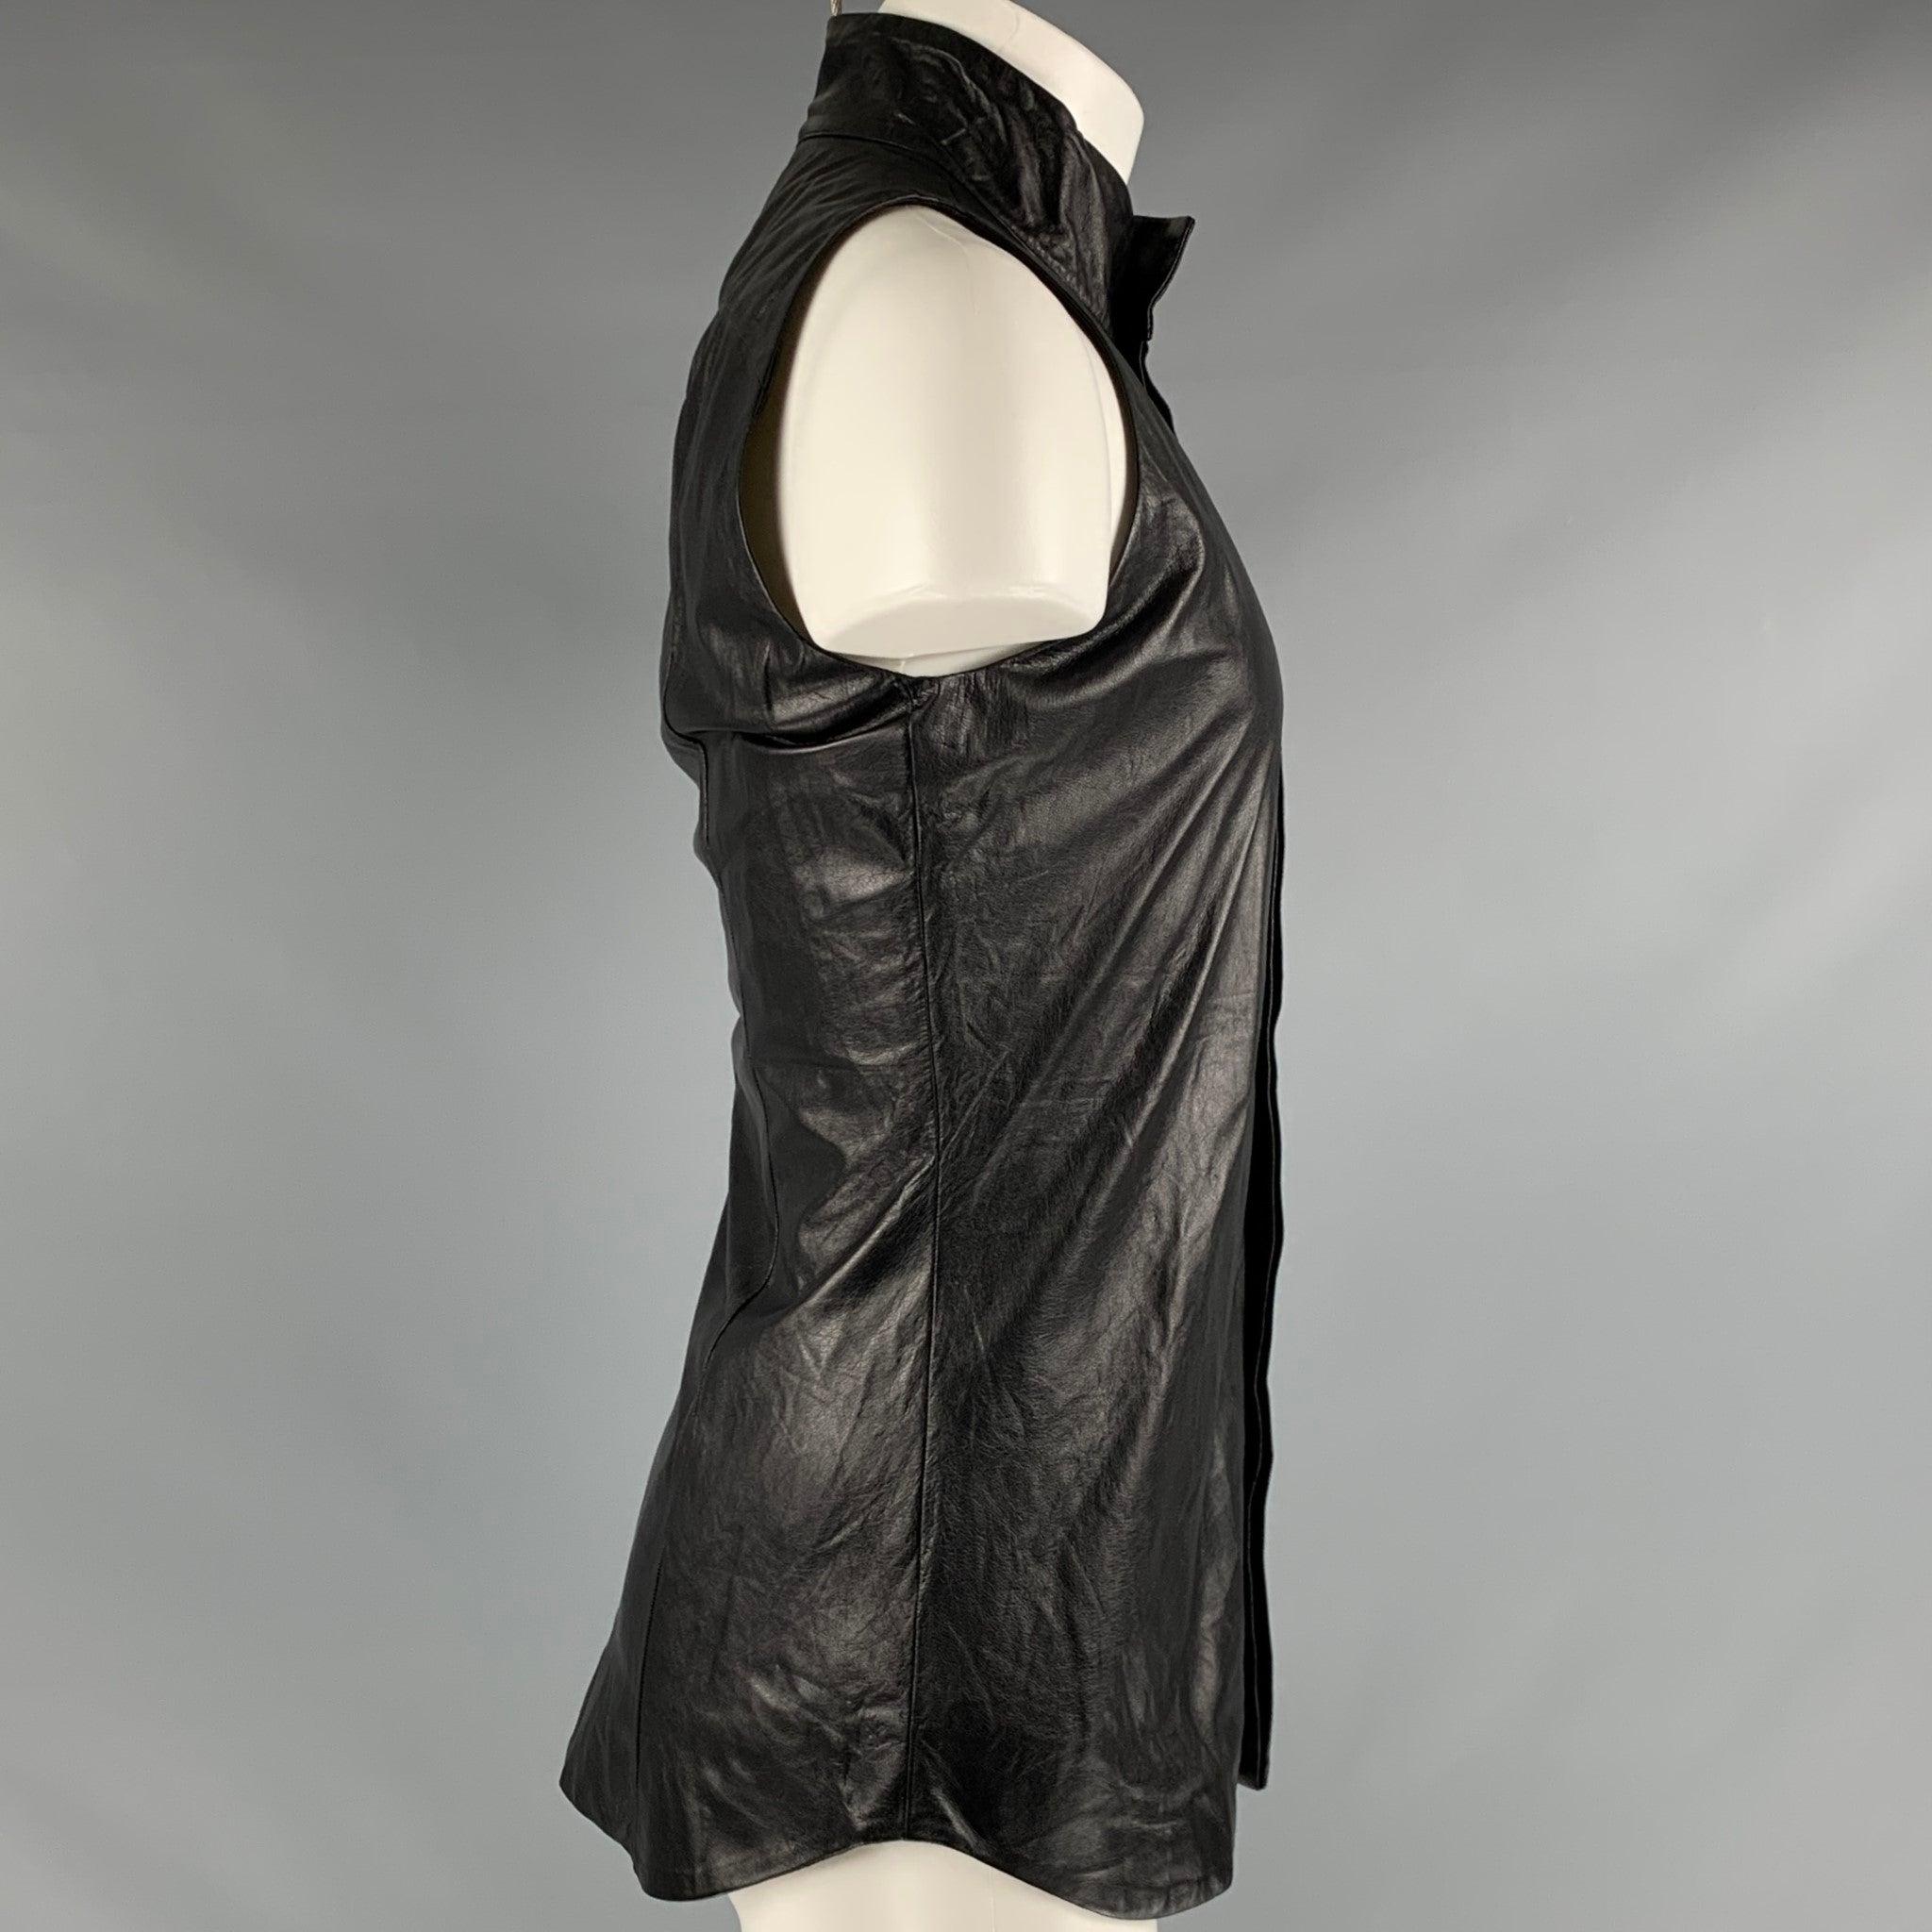 GARETH PUGH short sleeve shirt
in a black leather fabric featuring sleeveless style, and hidden button closure. Made in Italy.Very Good Pre-Owned Condition. Minor marks. 

Marked:   IT 46 

Measurements: 
 
Shoulder: 11.5 inches Chest: 36 inches